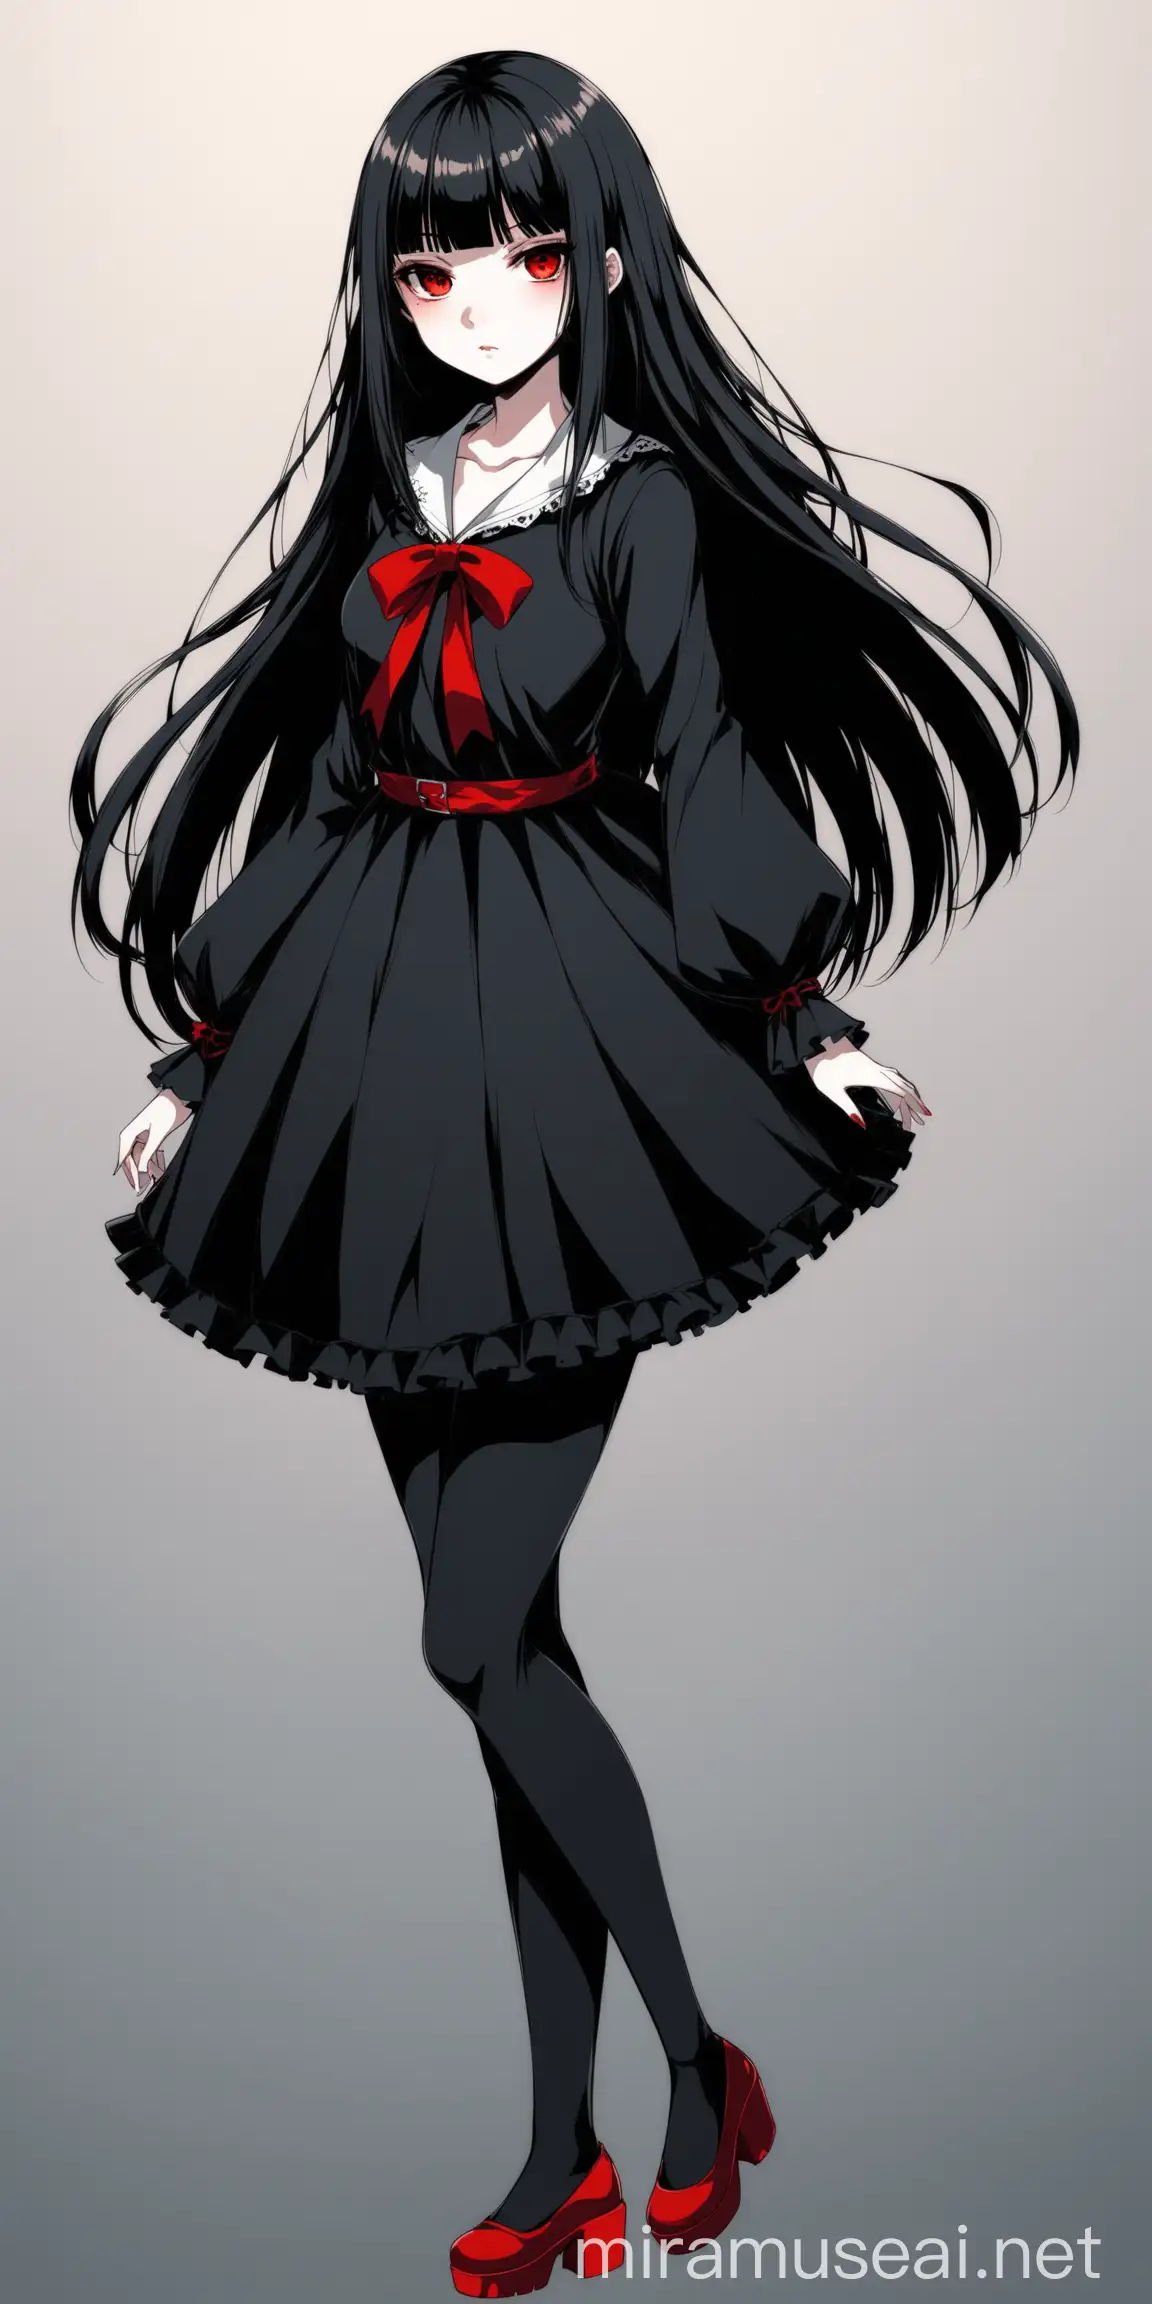 Anime Ghost Girl Possessing Female Doll with Black Hair and Red Eyes